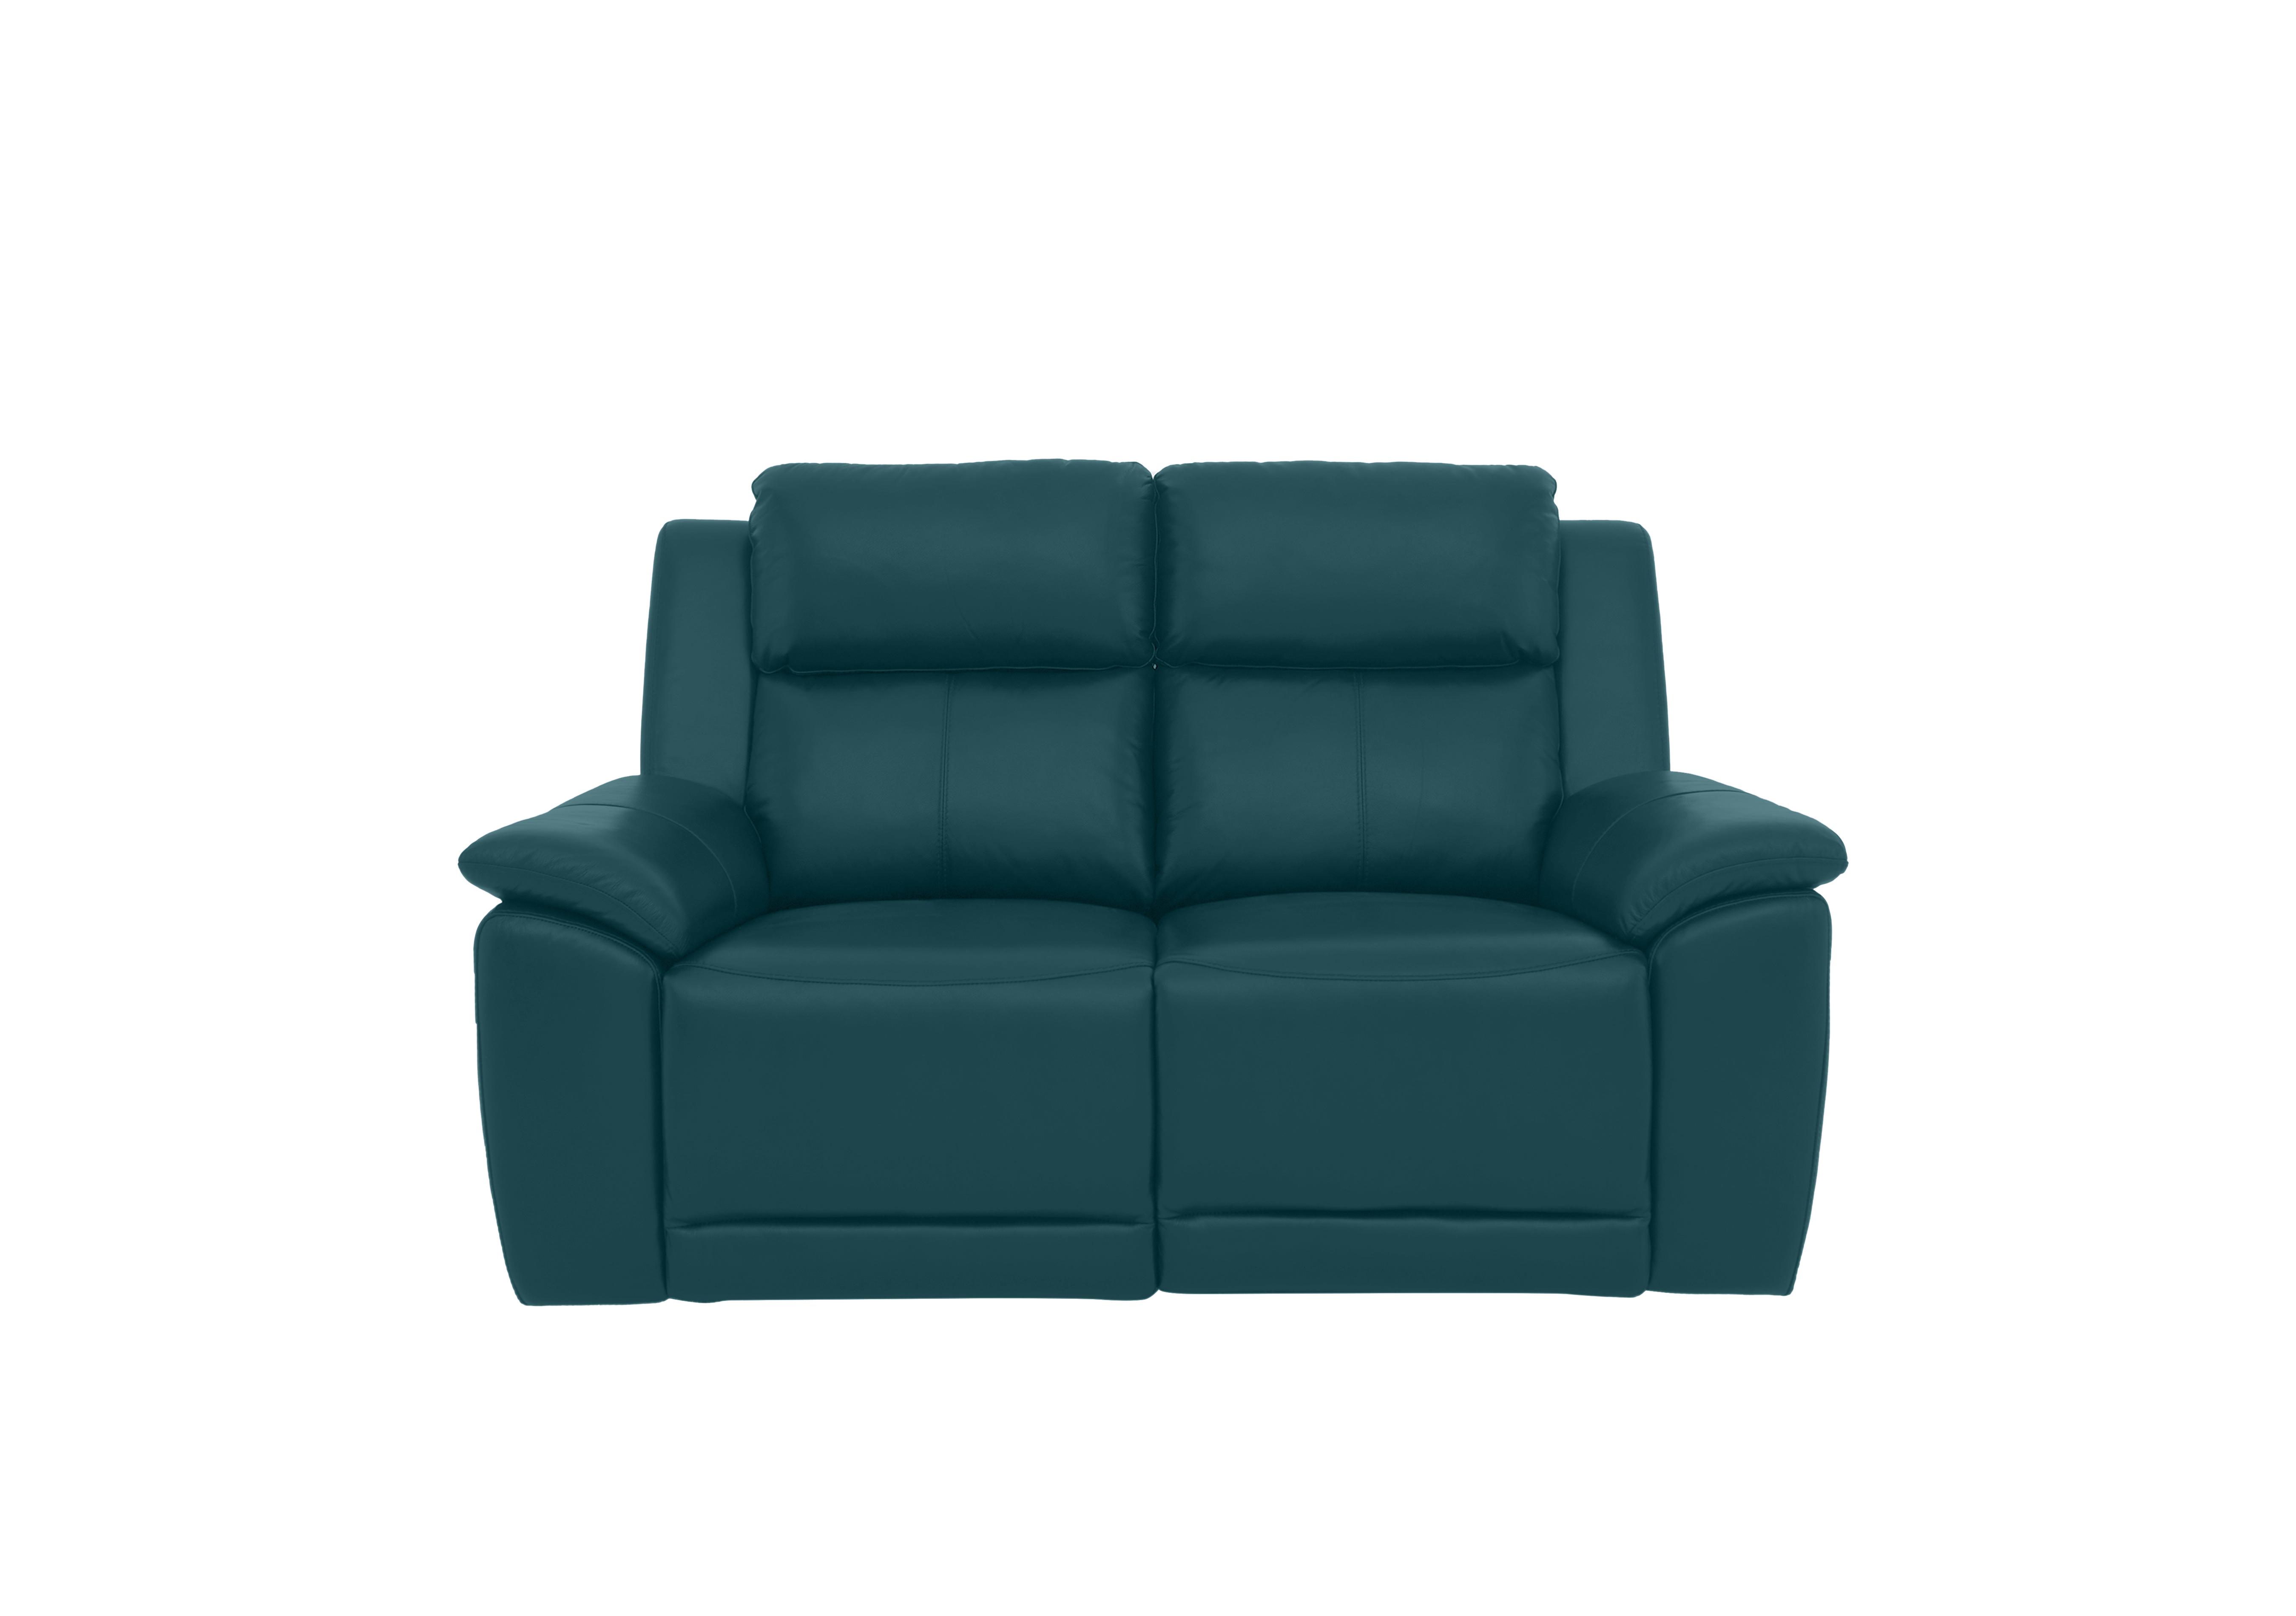 Utah 2 Seater Leather Power Recliner Sofa with Power Headrests and Power Lumbar in Midnight Jade Le-9314 on Furniture Village